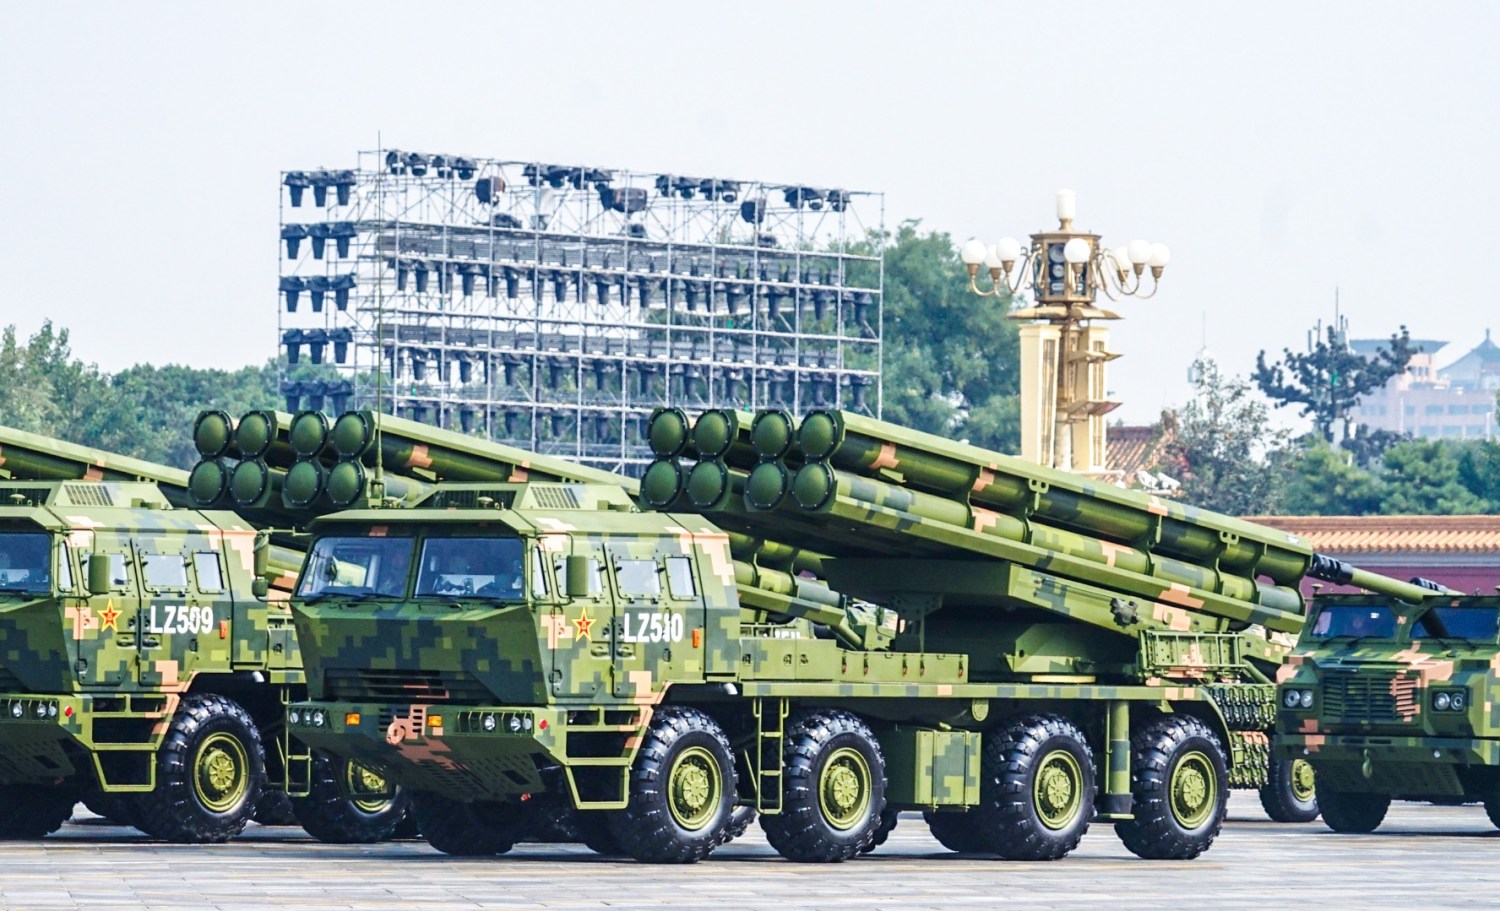 A Dongfeng-41 intercontinental strategic nuclear missiles group formation marches to celebrate the 70th anniversary of the founding of the People's Republic of China in Beijing, October 1, 2019.